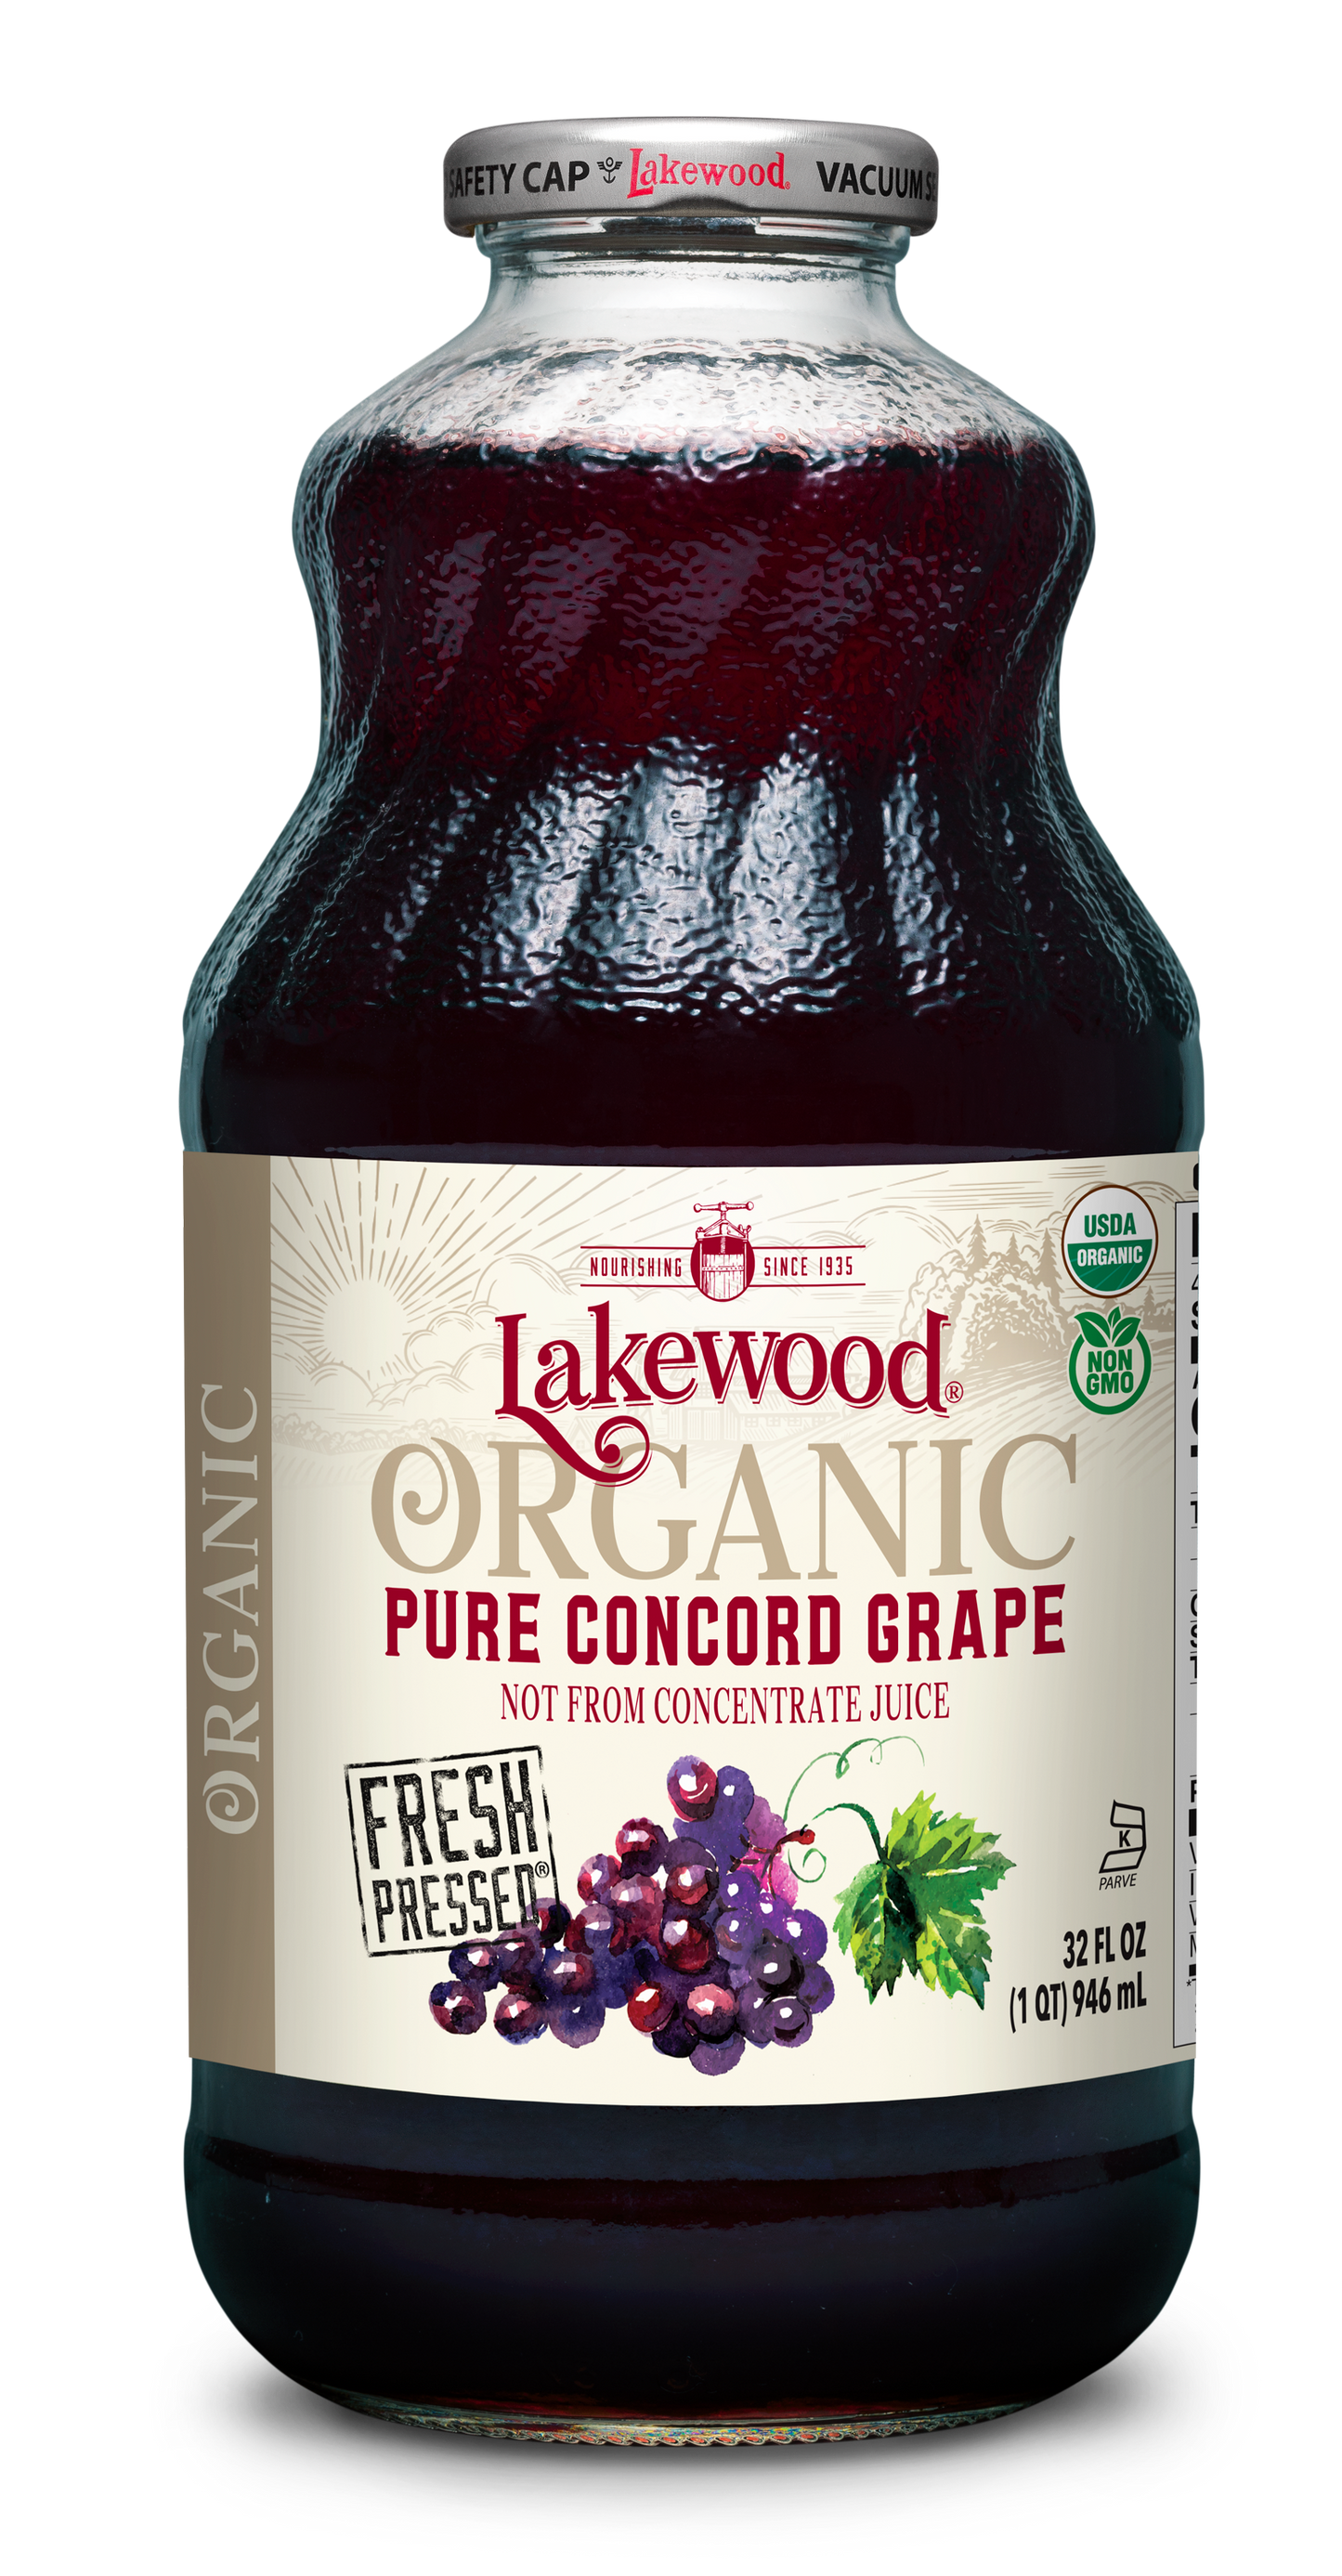 Organic PURE Concord Grape (32 oz, 2-pack or 6-pack)